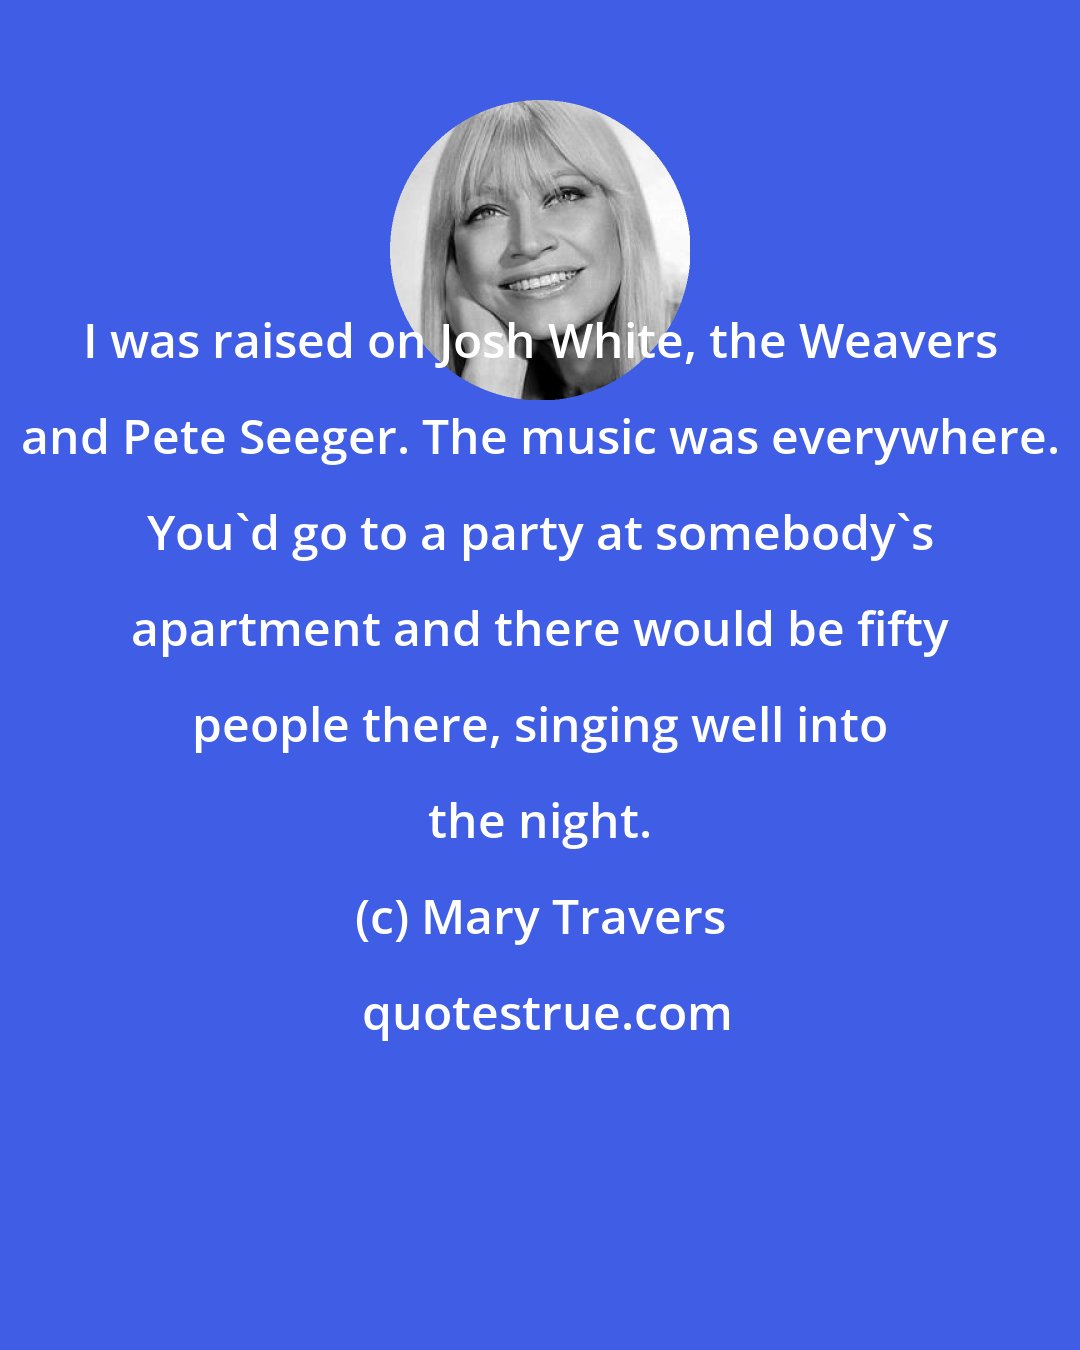 Mary Travers: I was raised on Josh White, the Weavers and Pete Seeger. The music was everywhere. You'd go to a party at somebody's apartment and there would be fifty people there, singing well into the night.